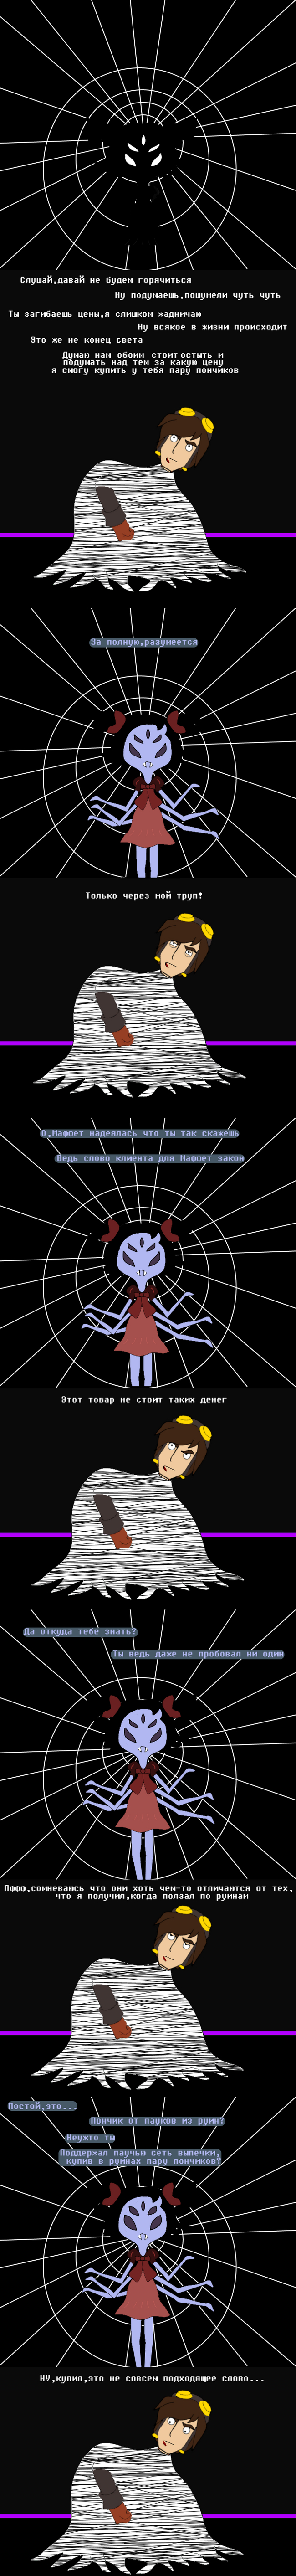 Undertale Of Deponia #30 Undertale, Deponia, , -,  ,  , Muffet, 